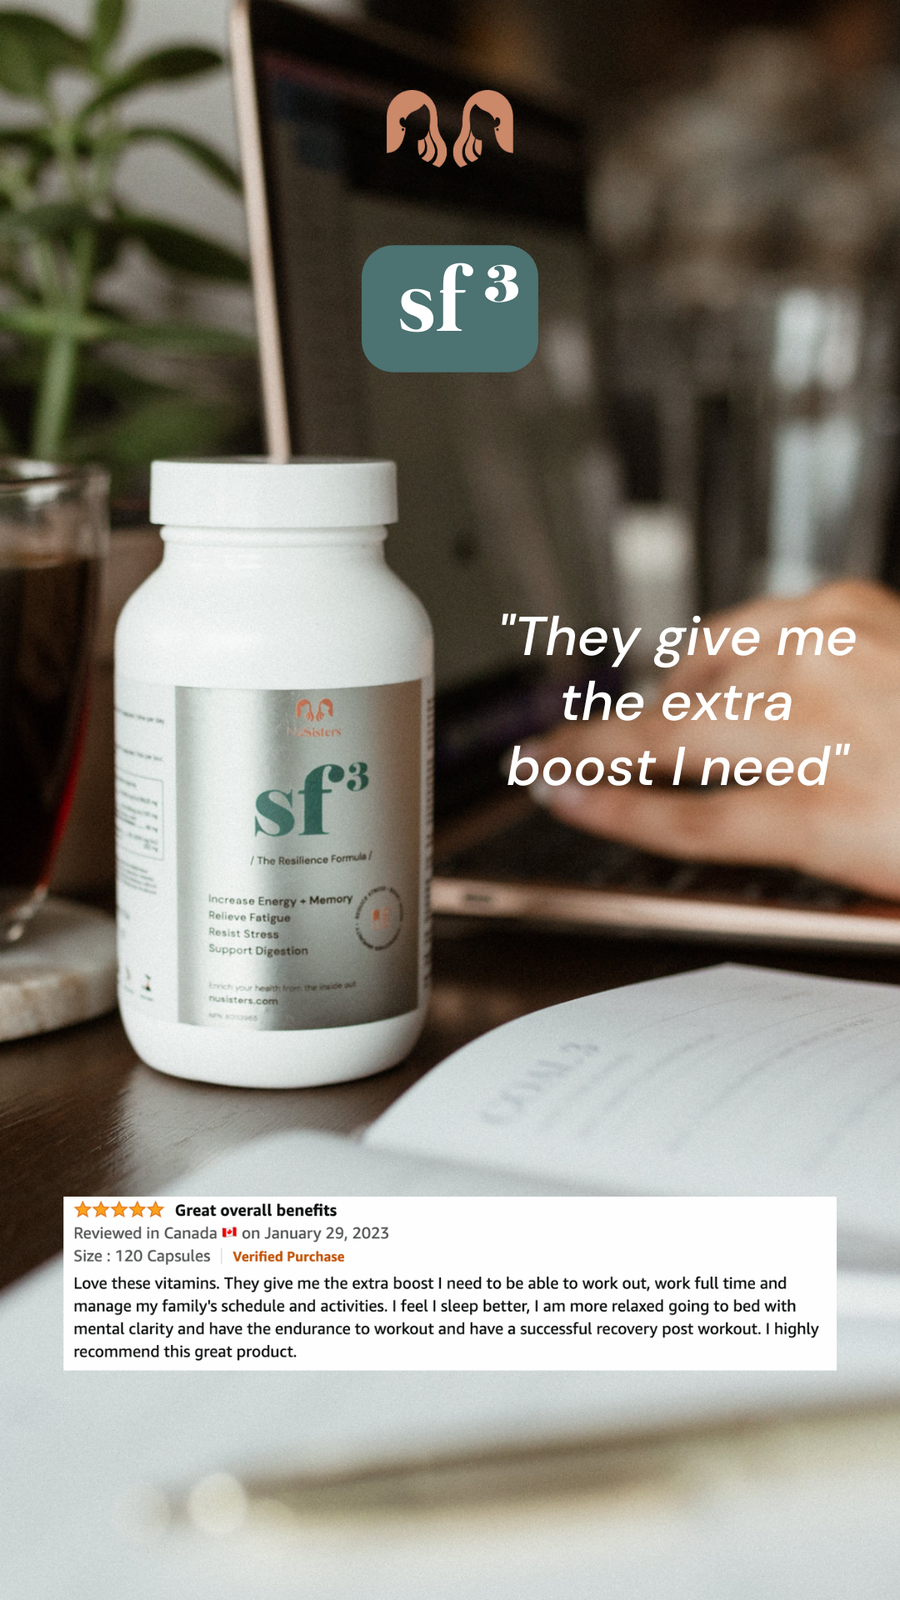 NUsisters. SF3. Stress Free Three 3. Increased energy + memory. Relieve Fatigue. Resist Stress Support Digestion. 60 capsules. In the background a laptop and a woman on it. Review "They give me the extra boost I need" Reviewed in Canada on January 28, 2023. Verified purchase. 5 star.